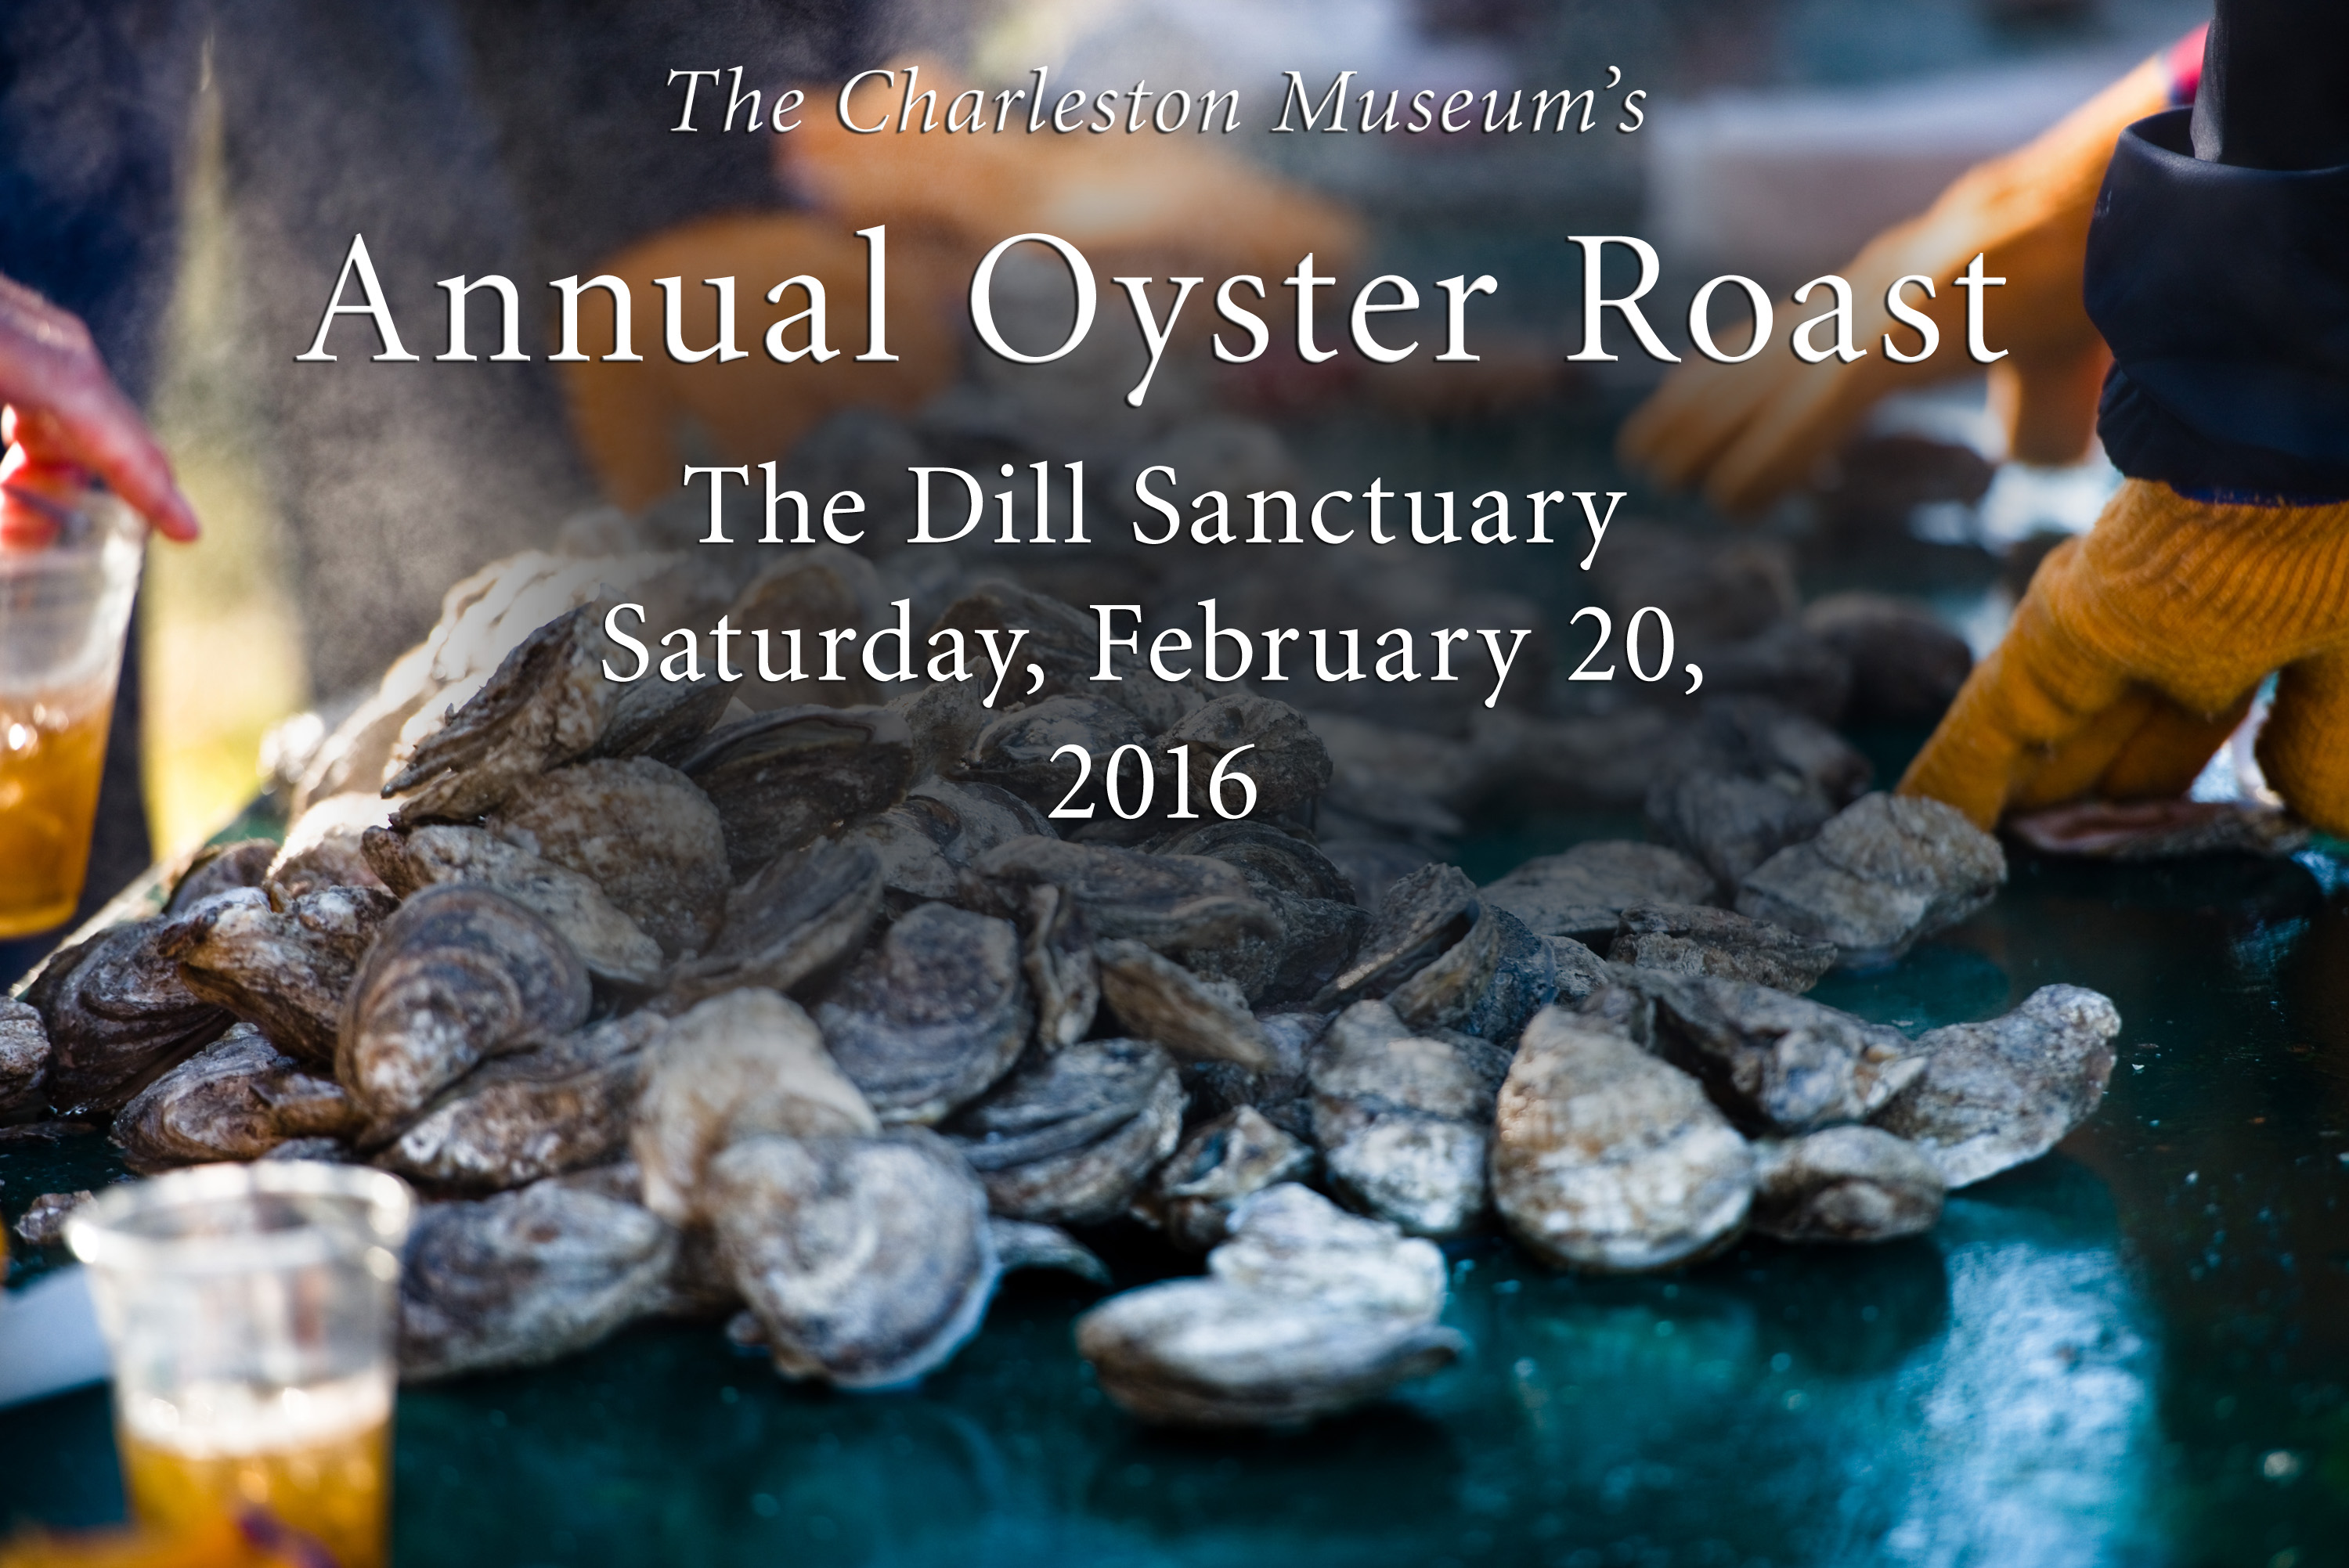 2016 Annual Oyster Roast at The Dill Sanctuary